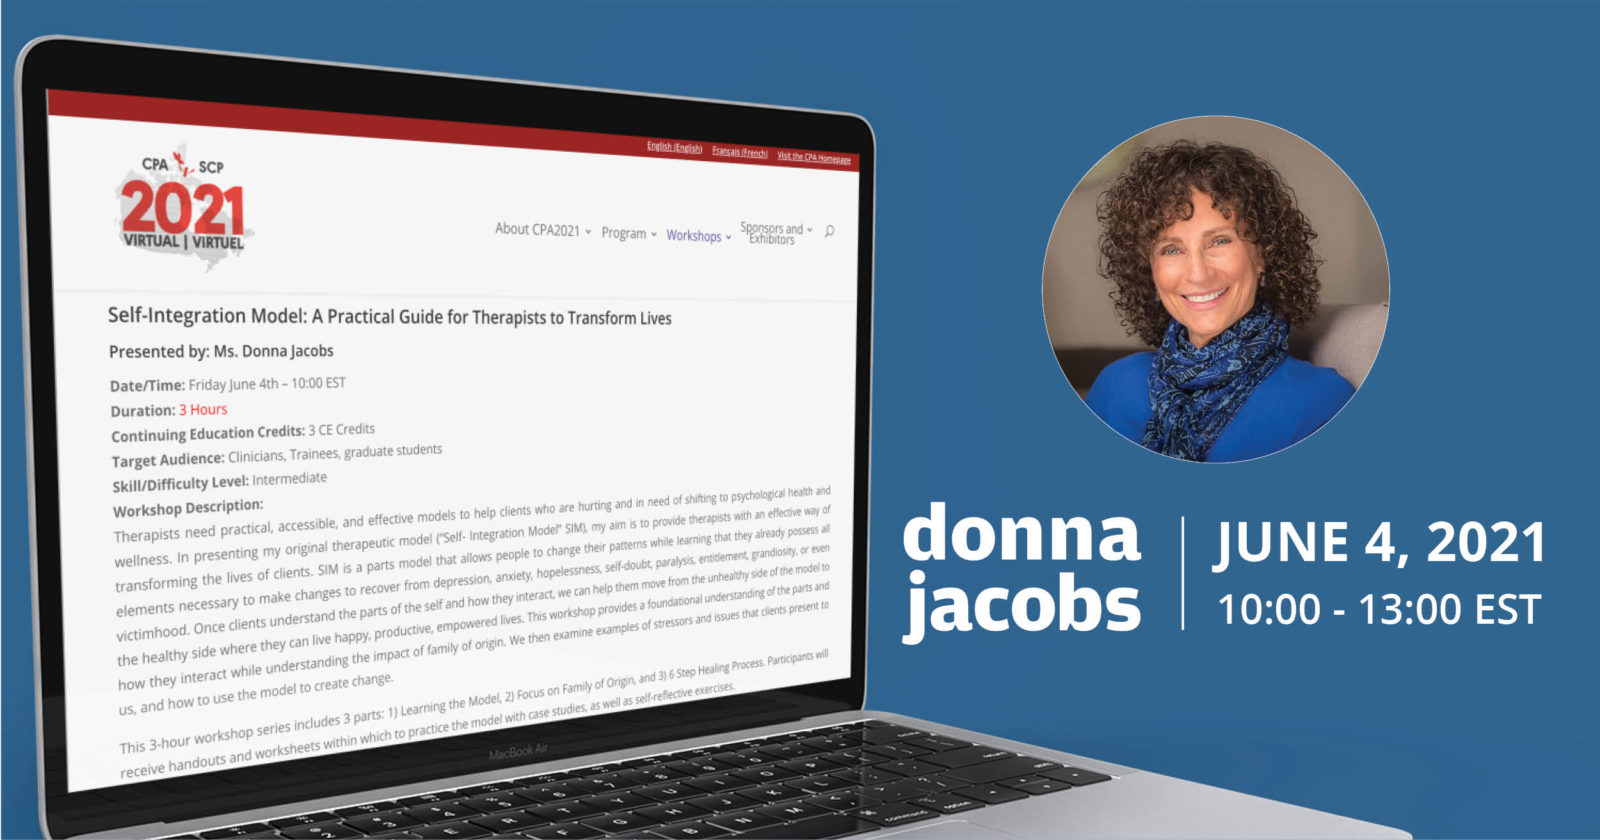 2021 CPA Pre-Conference Workshop by Donna Jacobs